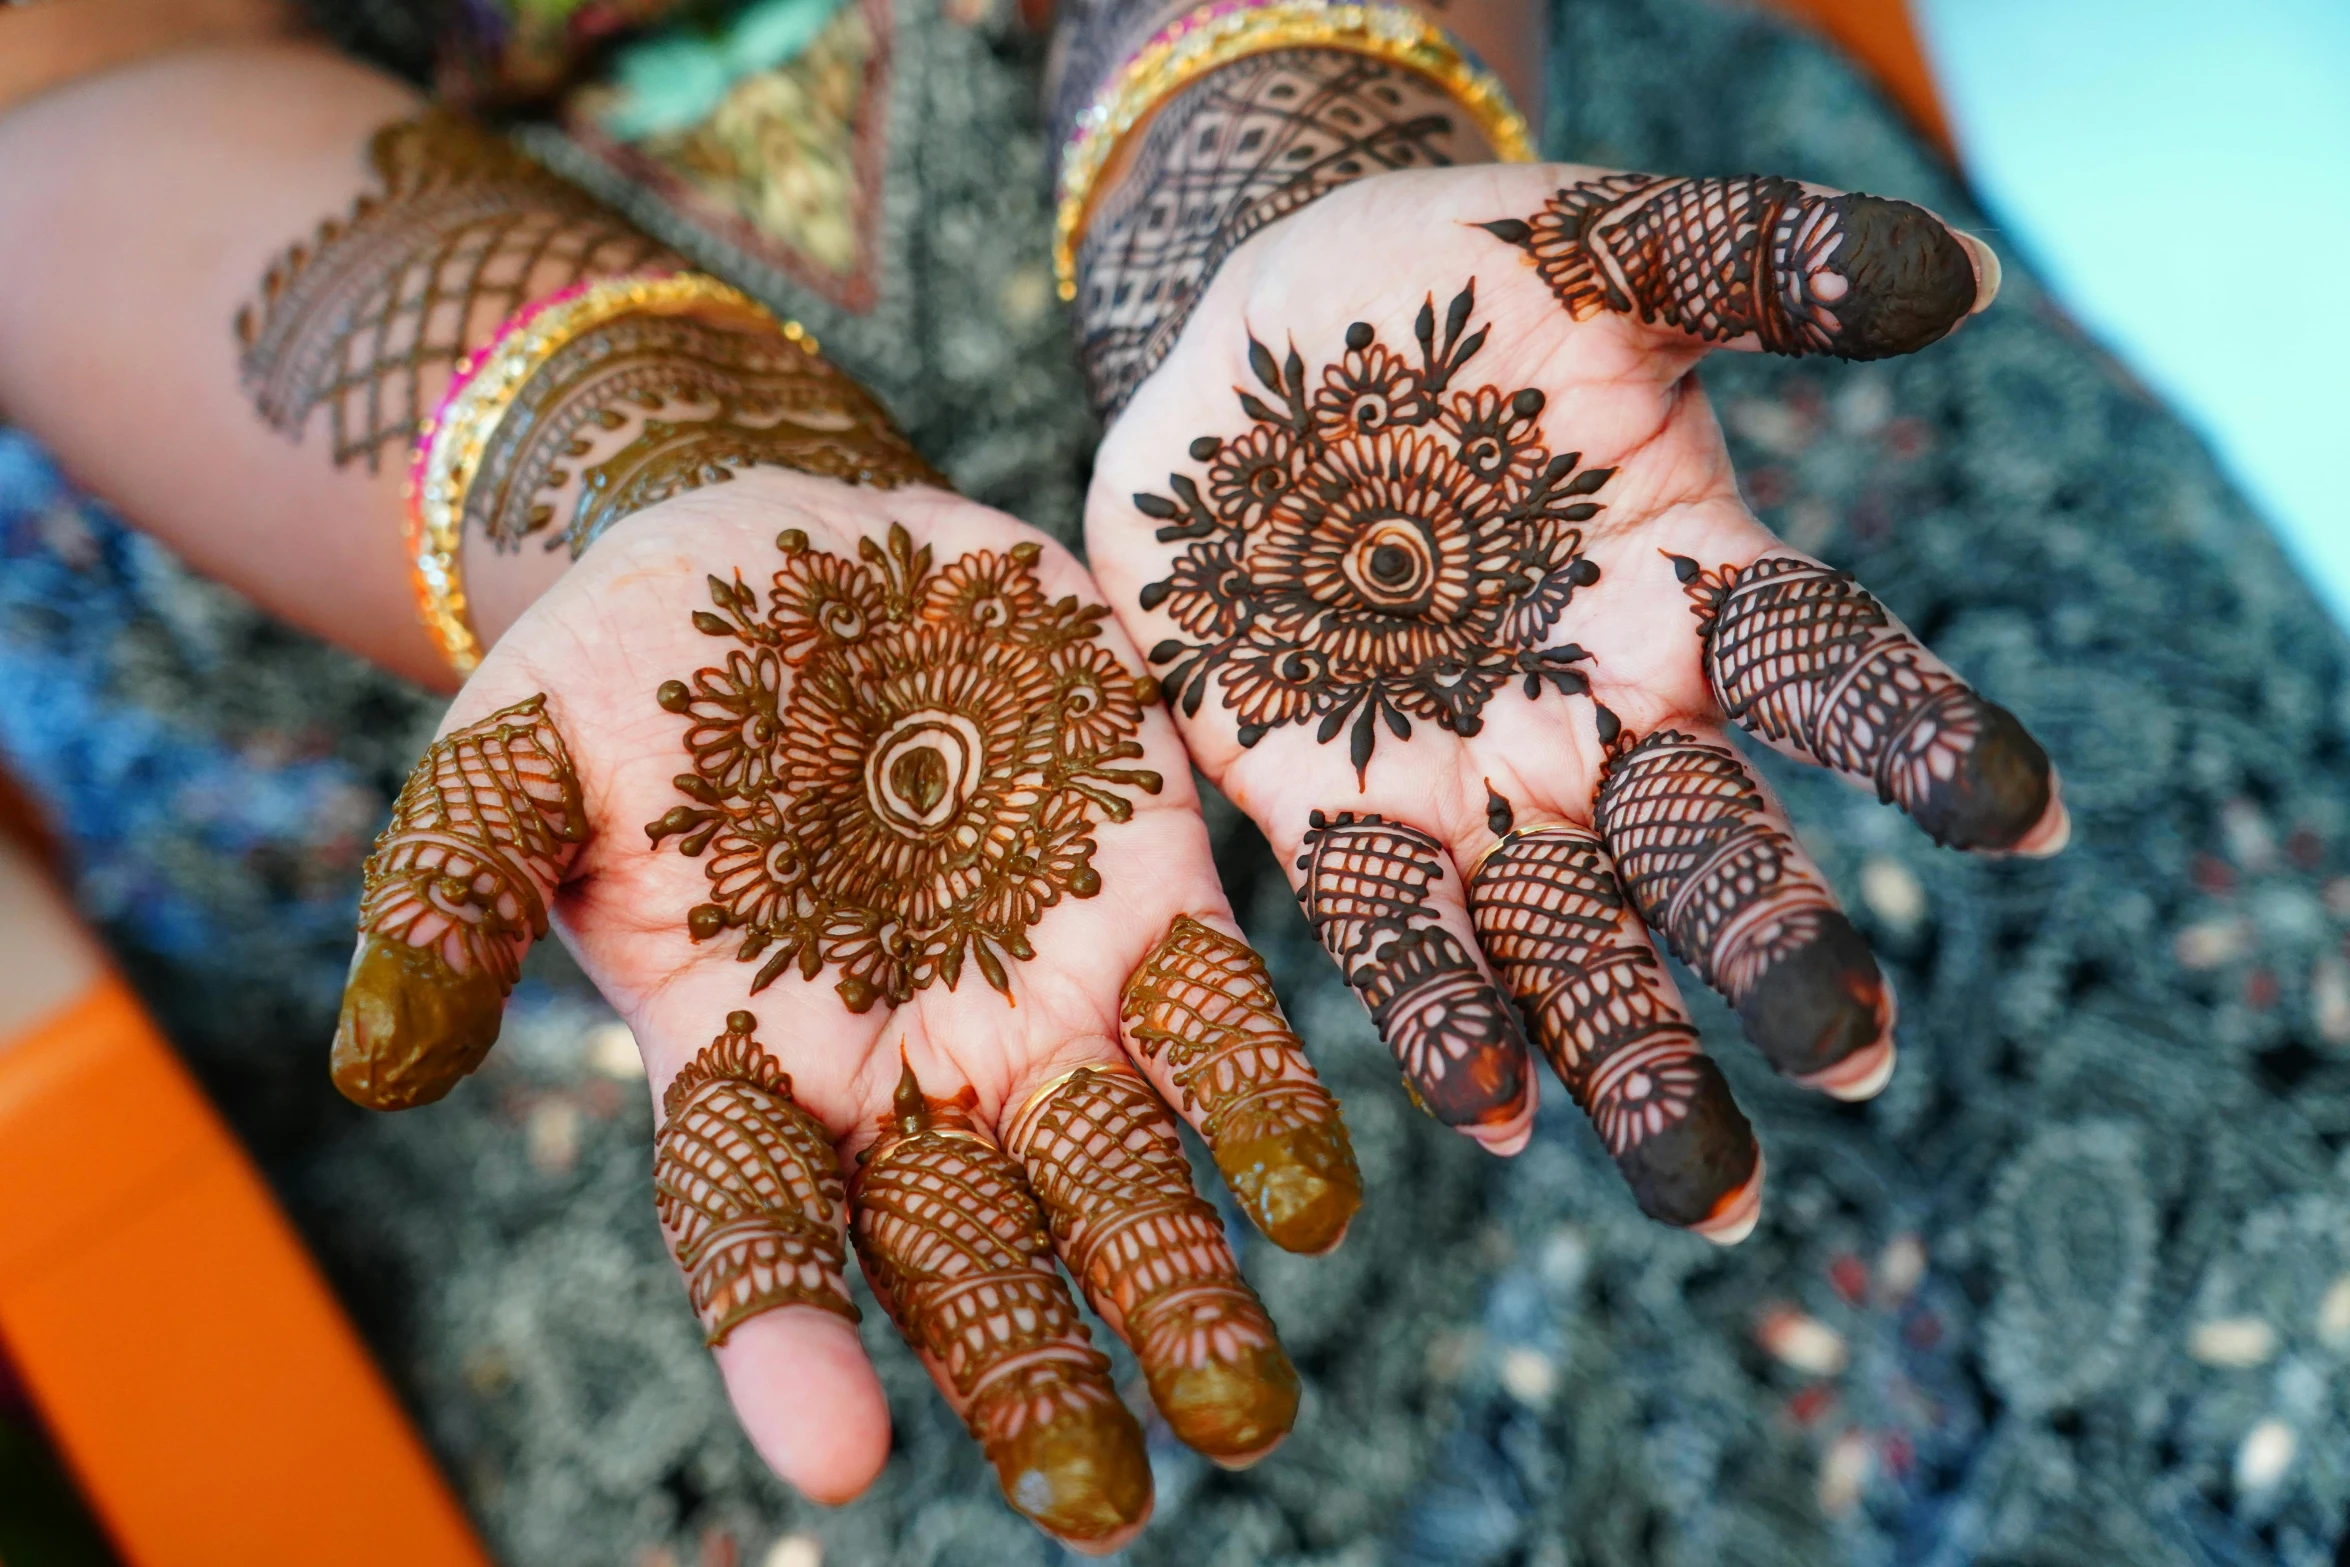 a close up of a person's hands with henna tattoos, an album cover, traditional makeup, palm lines, outside intricate, mandalas